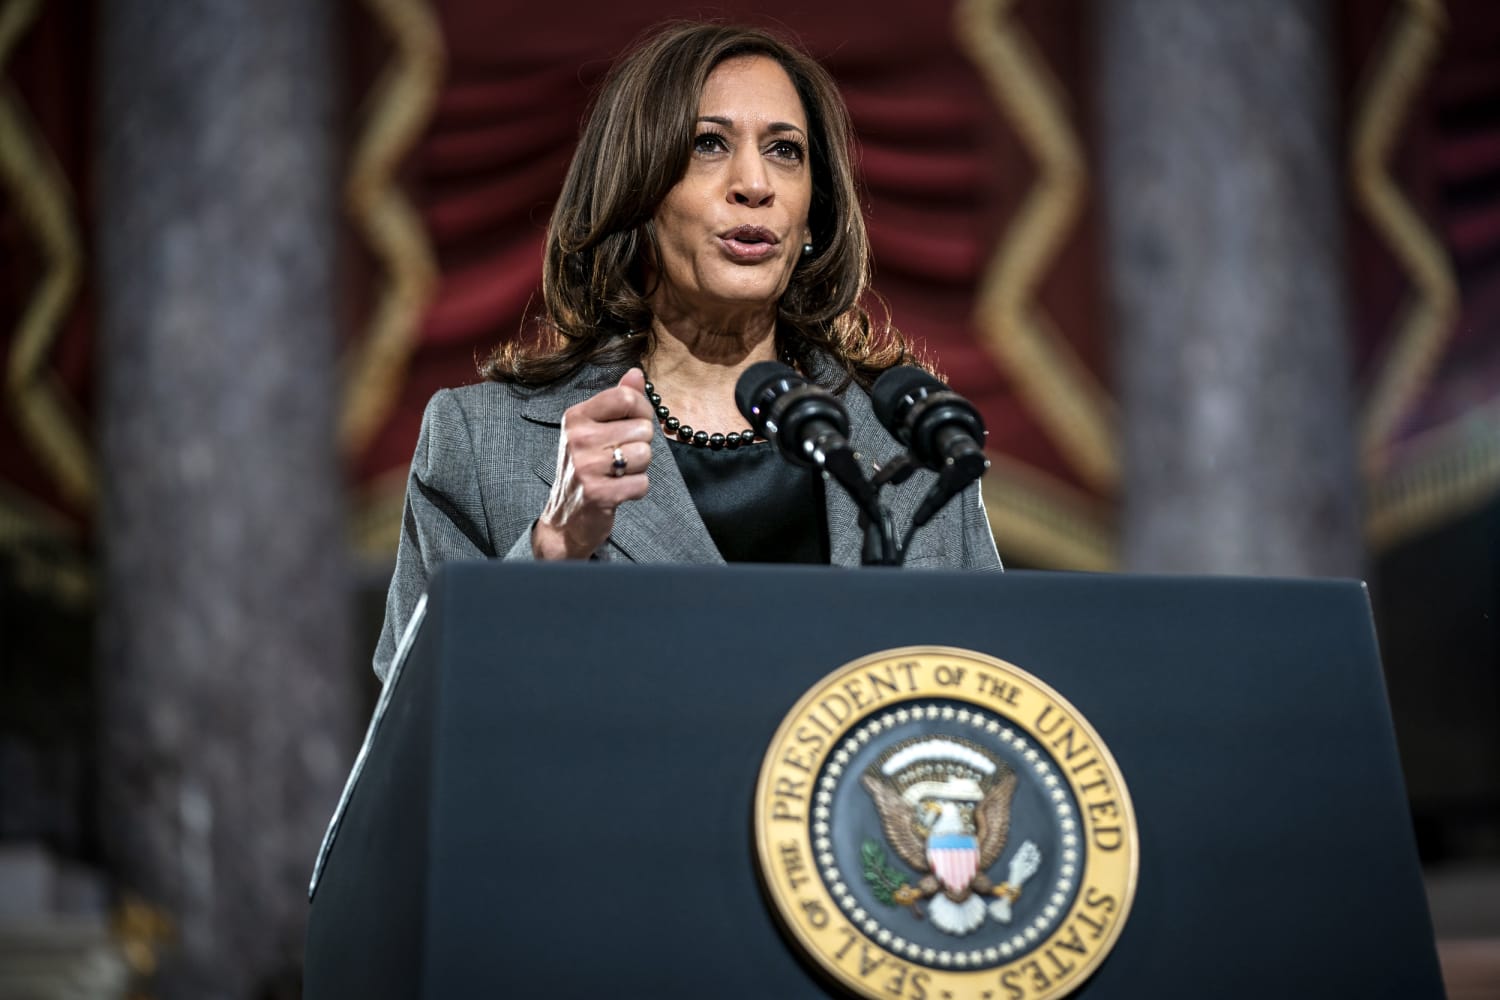 Kamala Harris was at DNC on Jan. 6 when pipe bomb was found outside